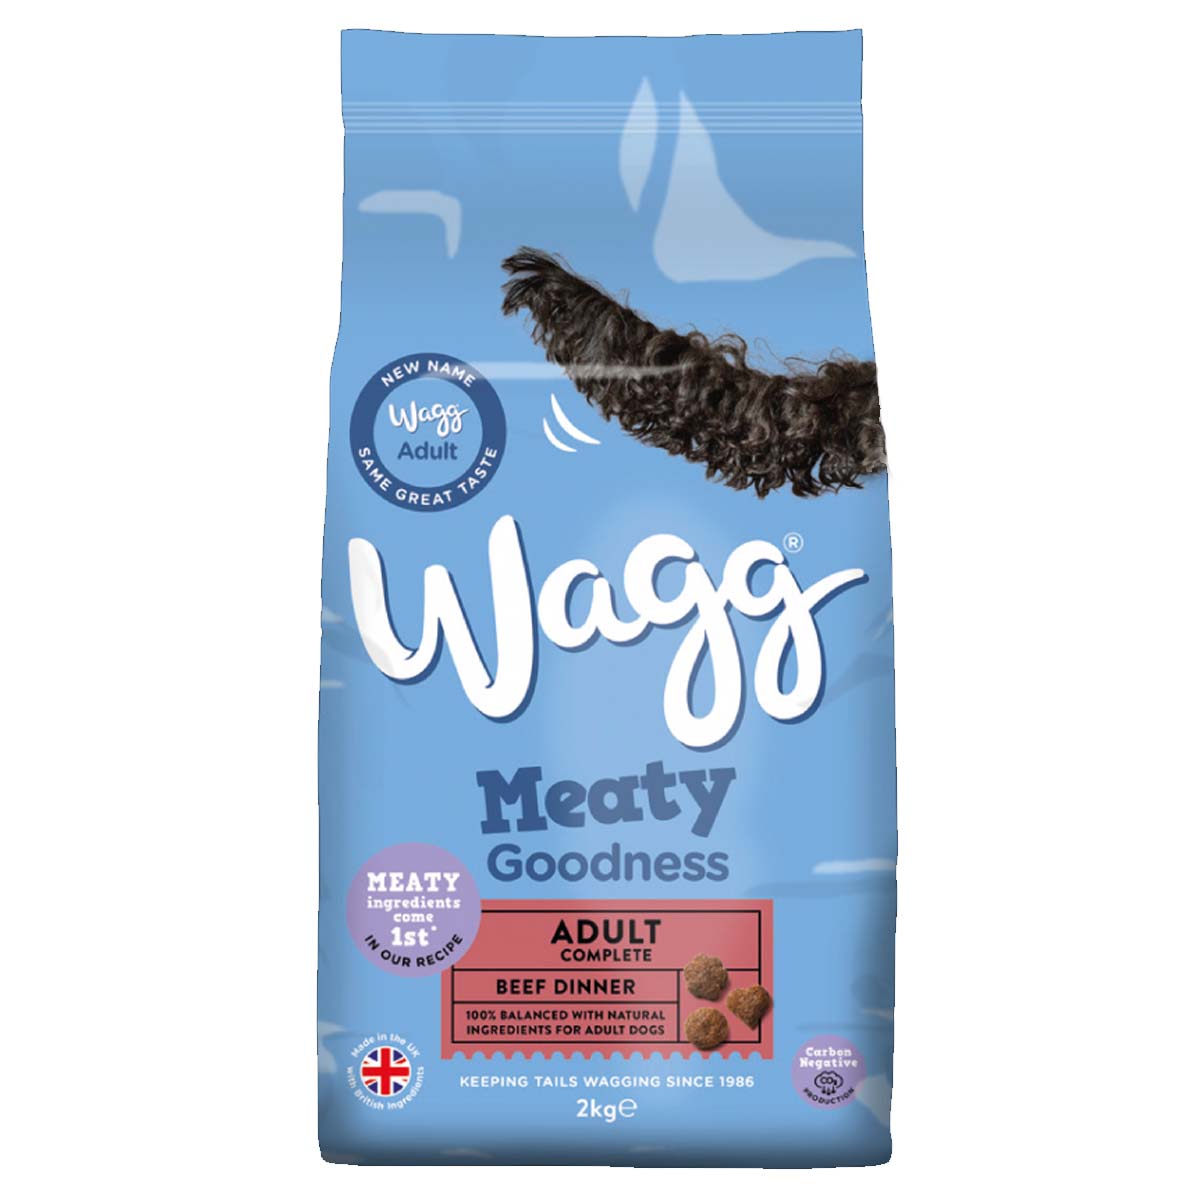 Wagg - Meaty Goodness Adult Complete Beef Dinner Dry Dog Food - 2kg - Continental Food Store